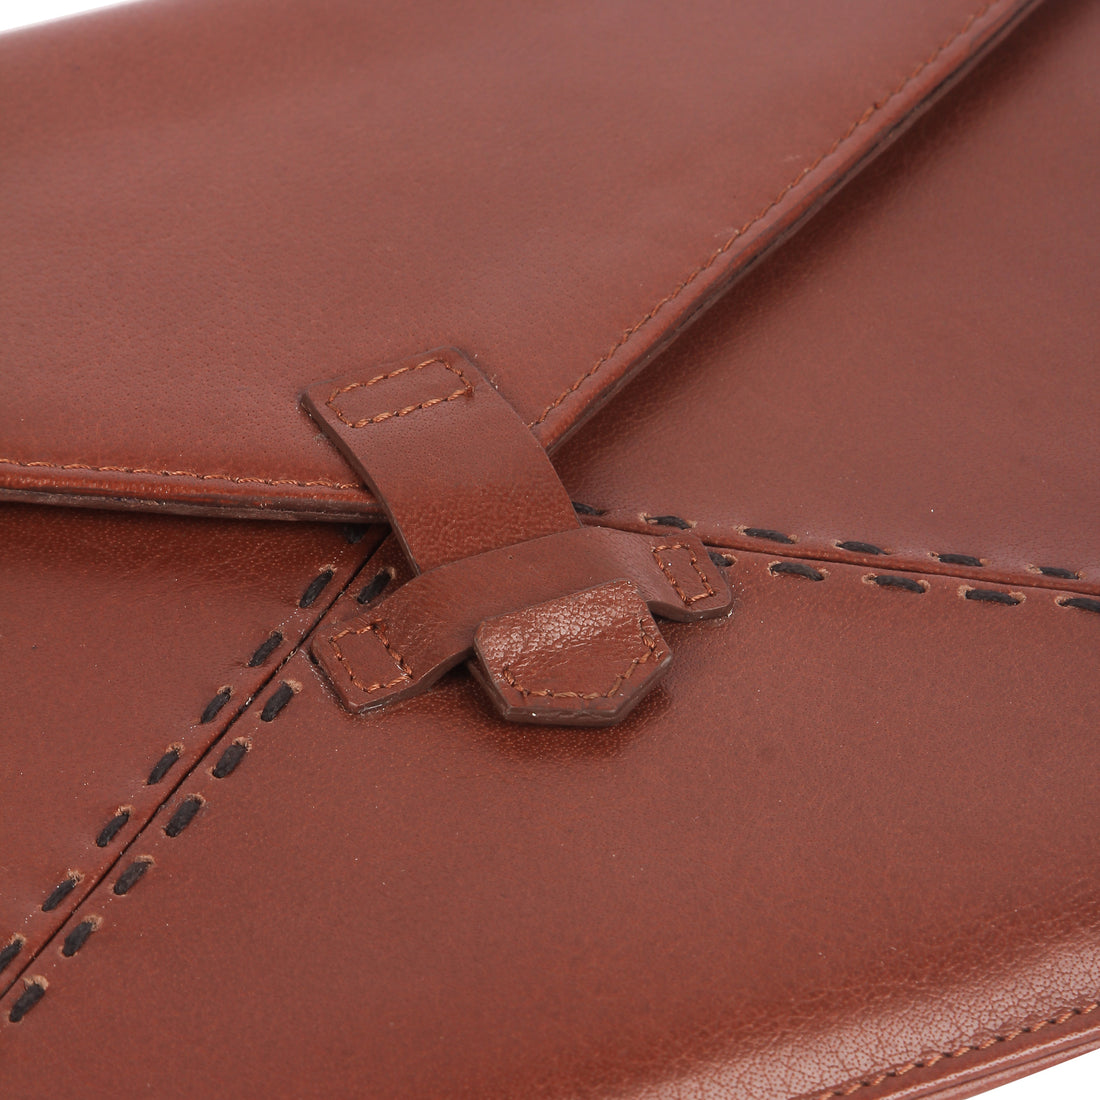 Signature Leather Sleeve for 10.5 Inch and 11 Inch iPad Pro - Cognac Colour